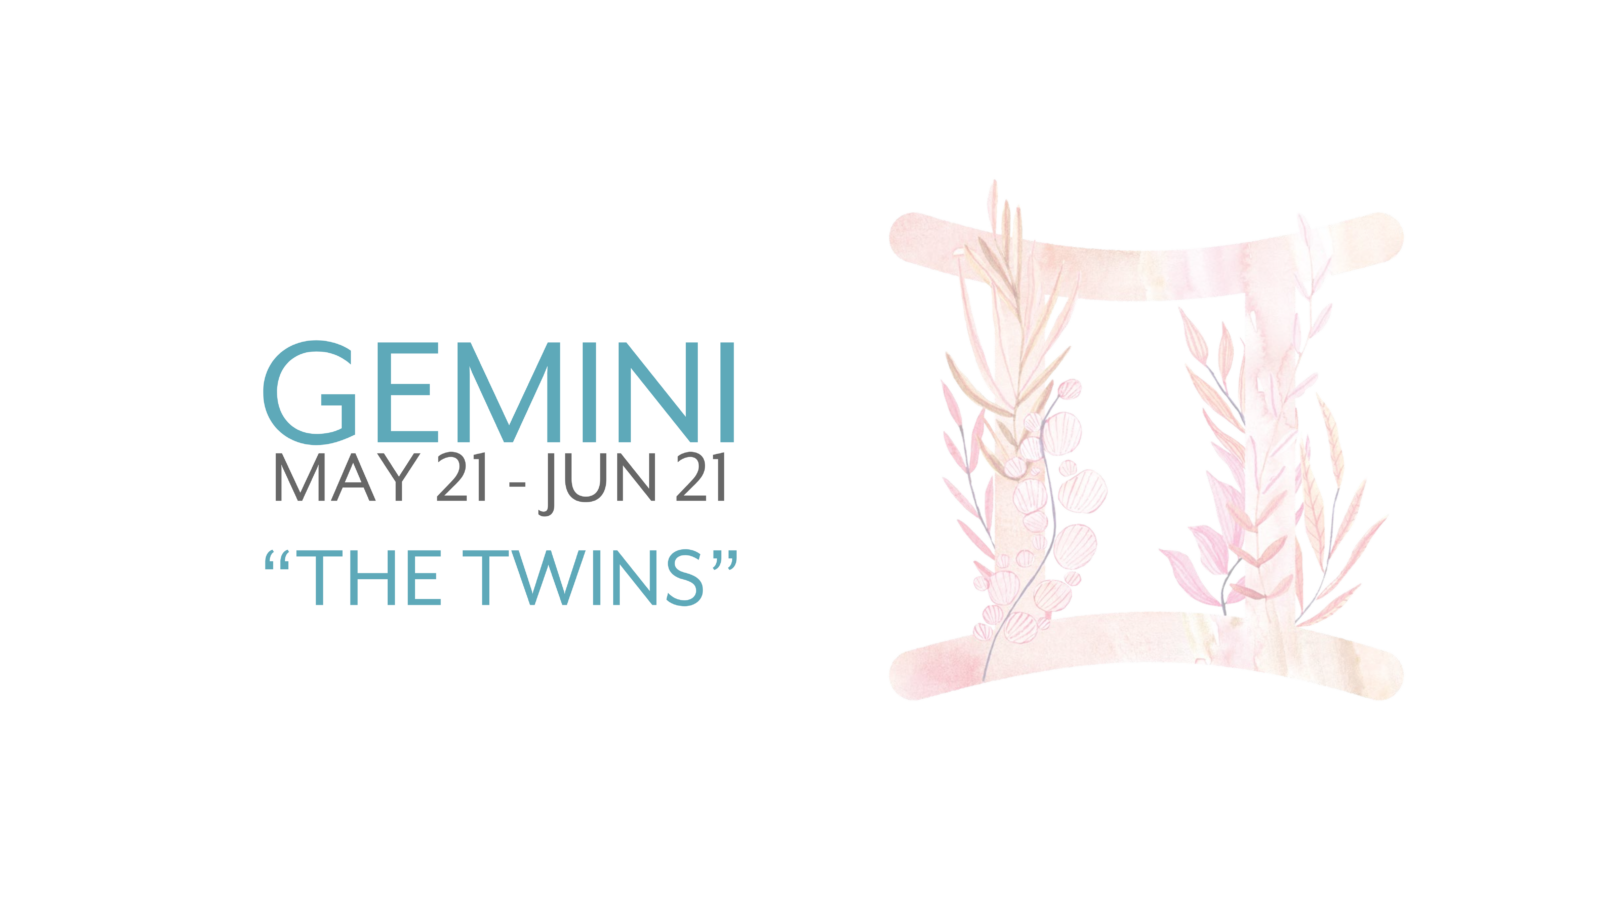 Gemini house plant recommendation birthdays from May 21 - June 21